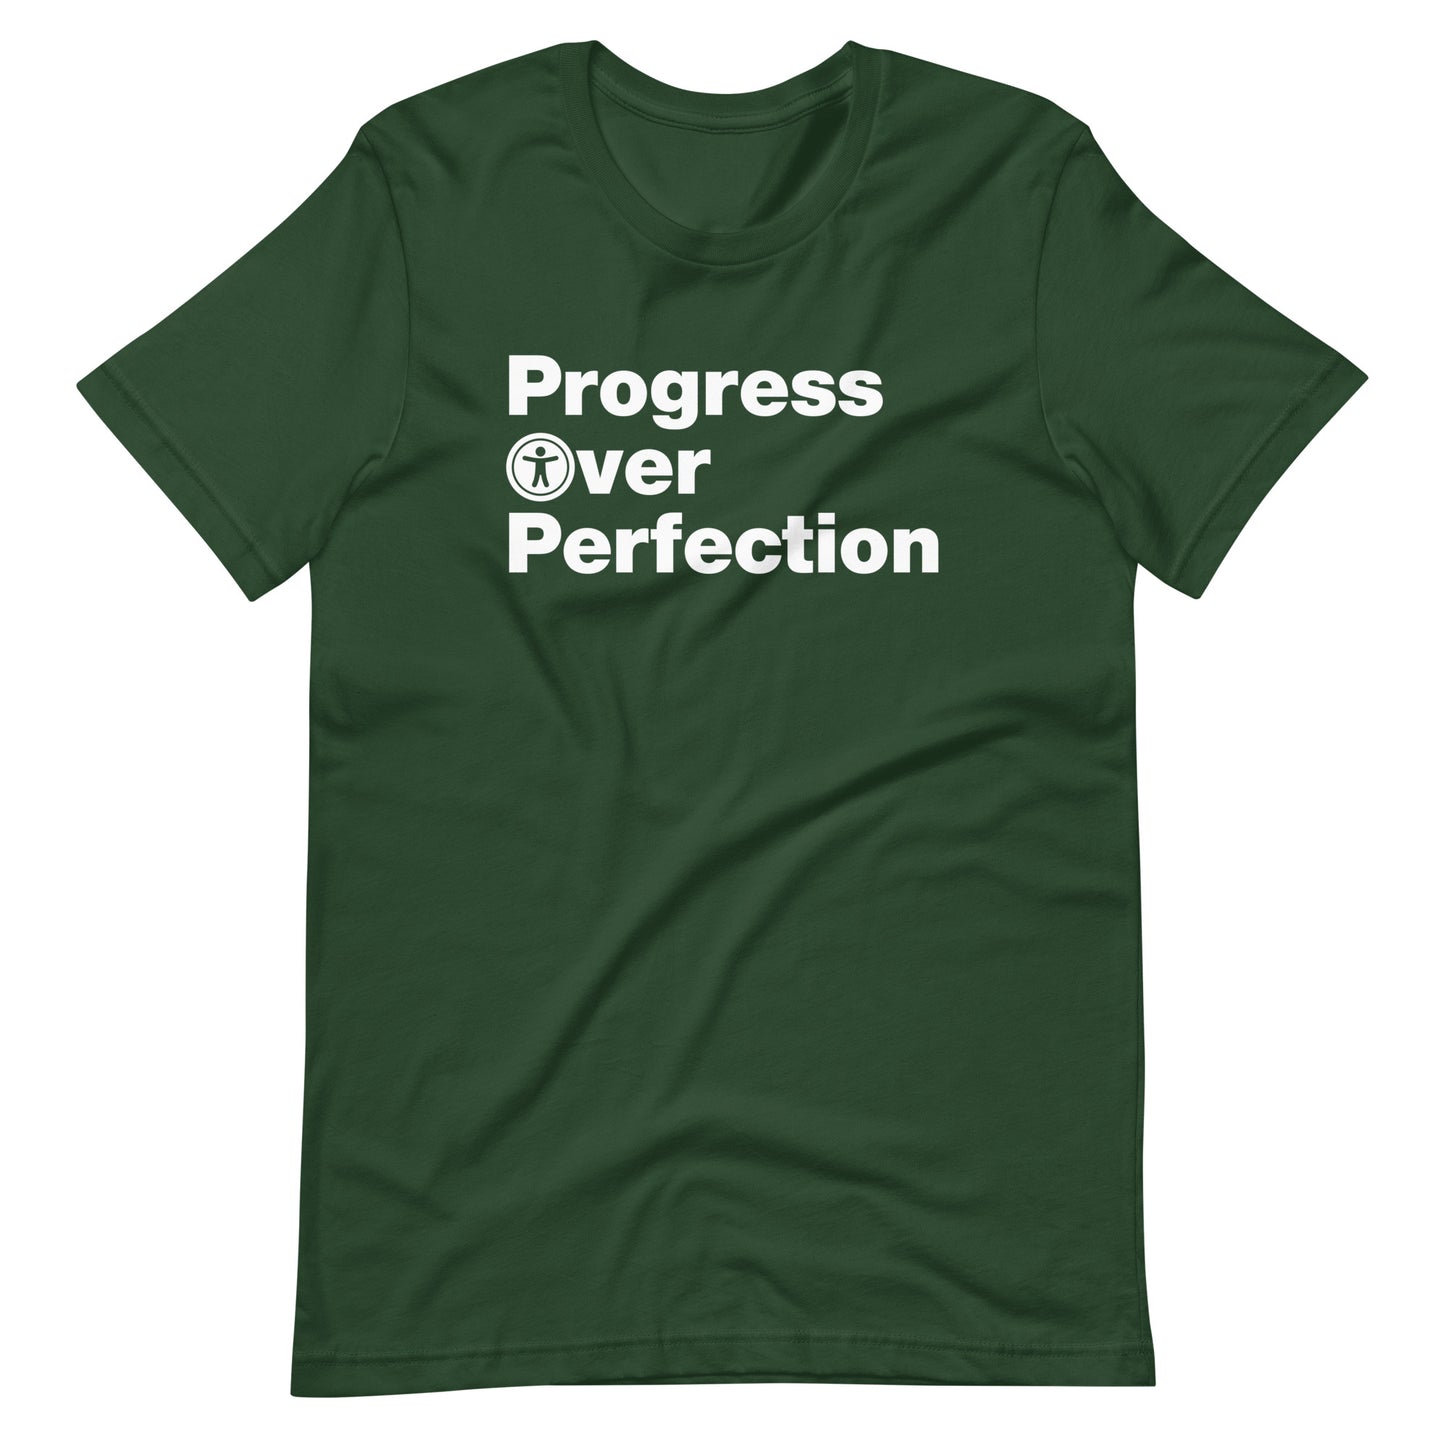 White, Progress Over Perfection, words, stacked, left aligned. 'O' in Over is round universal icon, on front of dark green t-shirt.